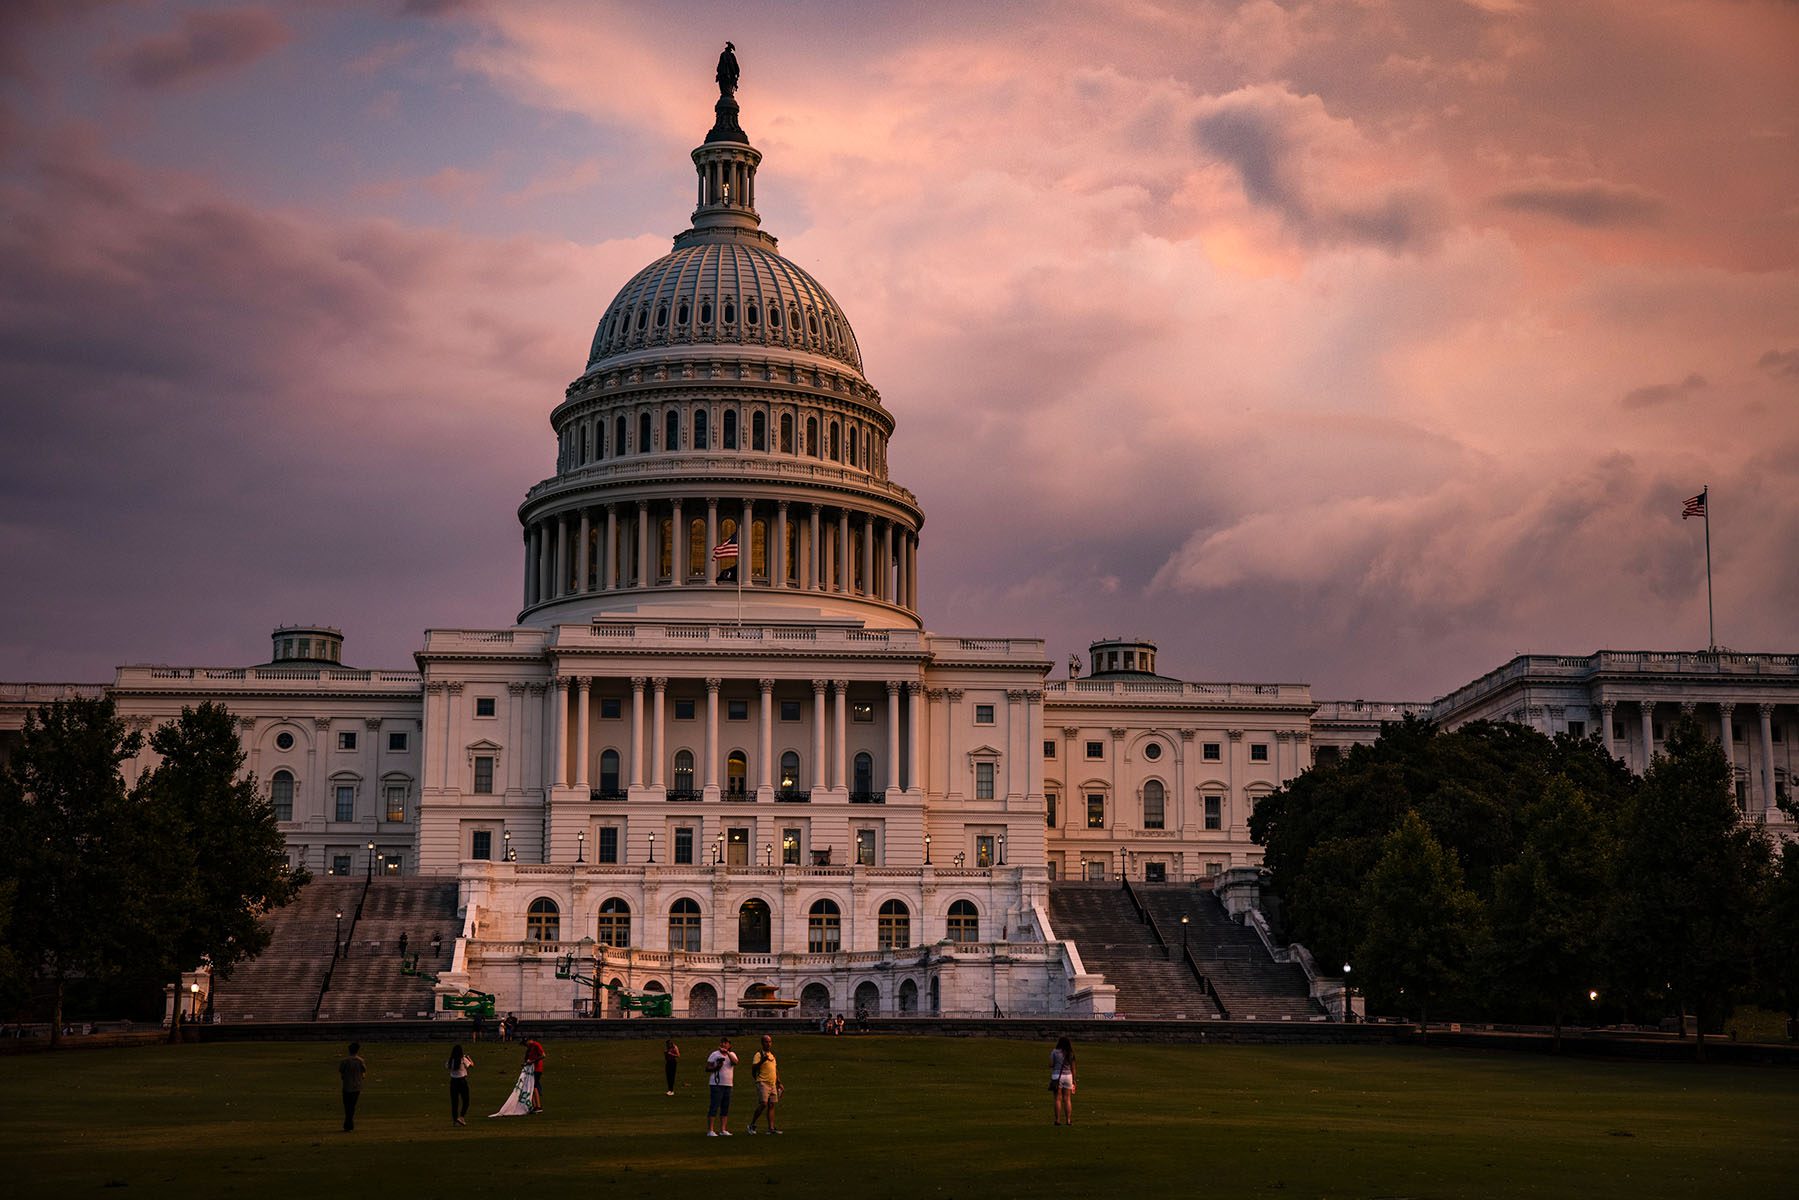 The U.S. Capitol Building is seen as the sun sets and large clouds from a thunderstorm run through the area.